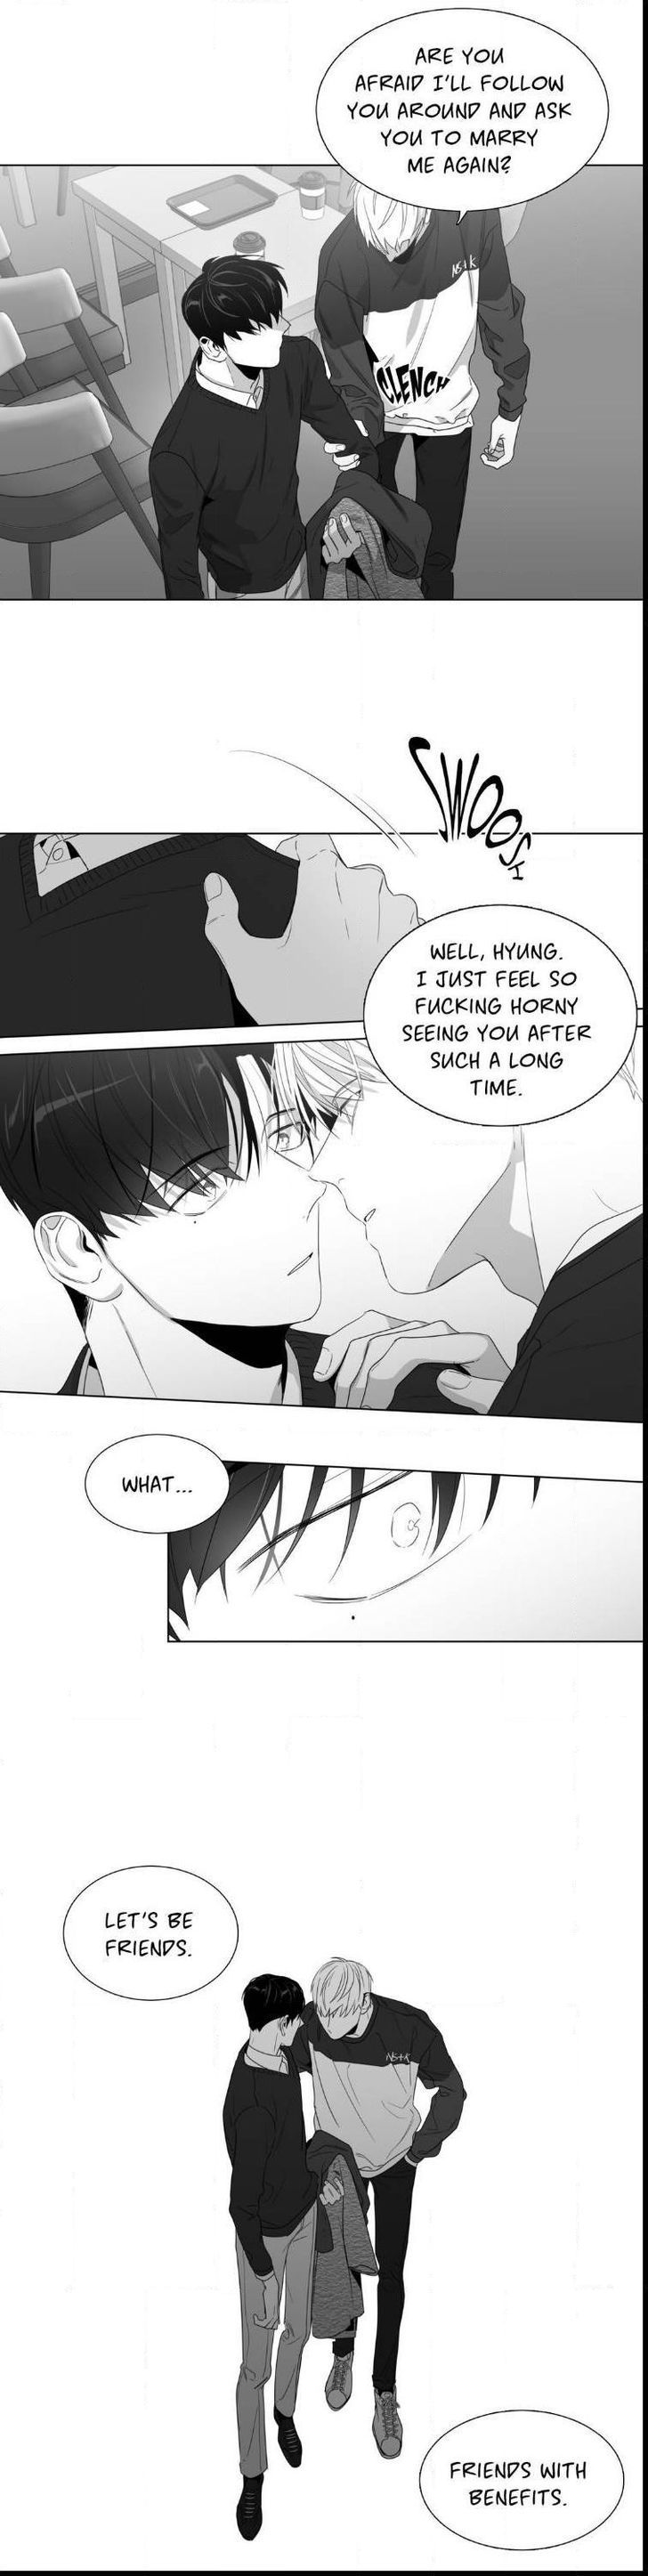 Lover Boy (Lezhin) Chapter 051 page 15